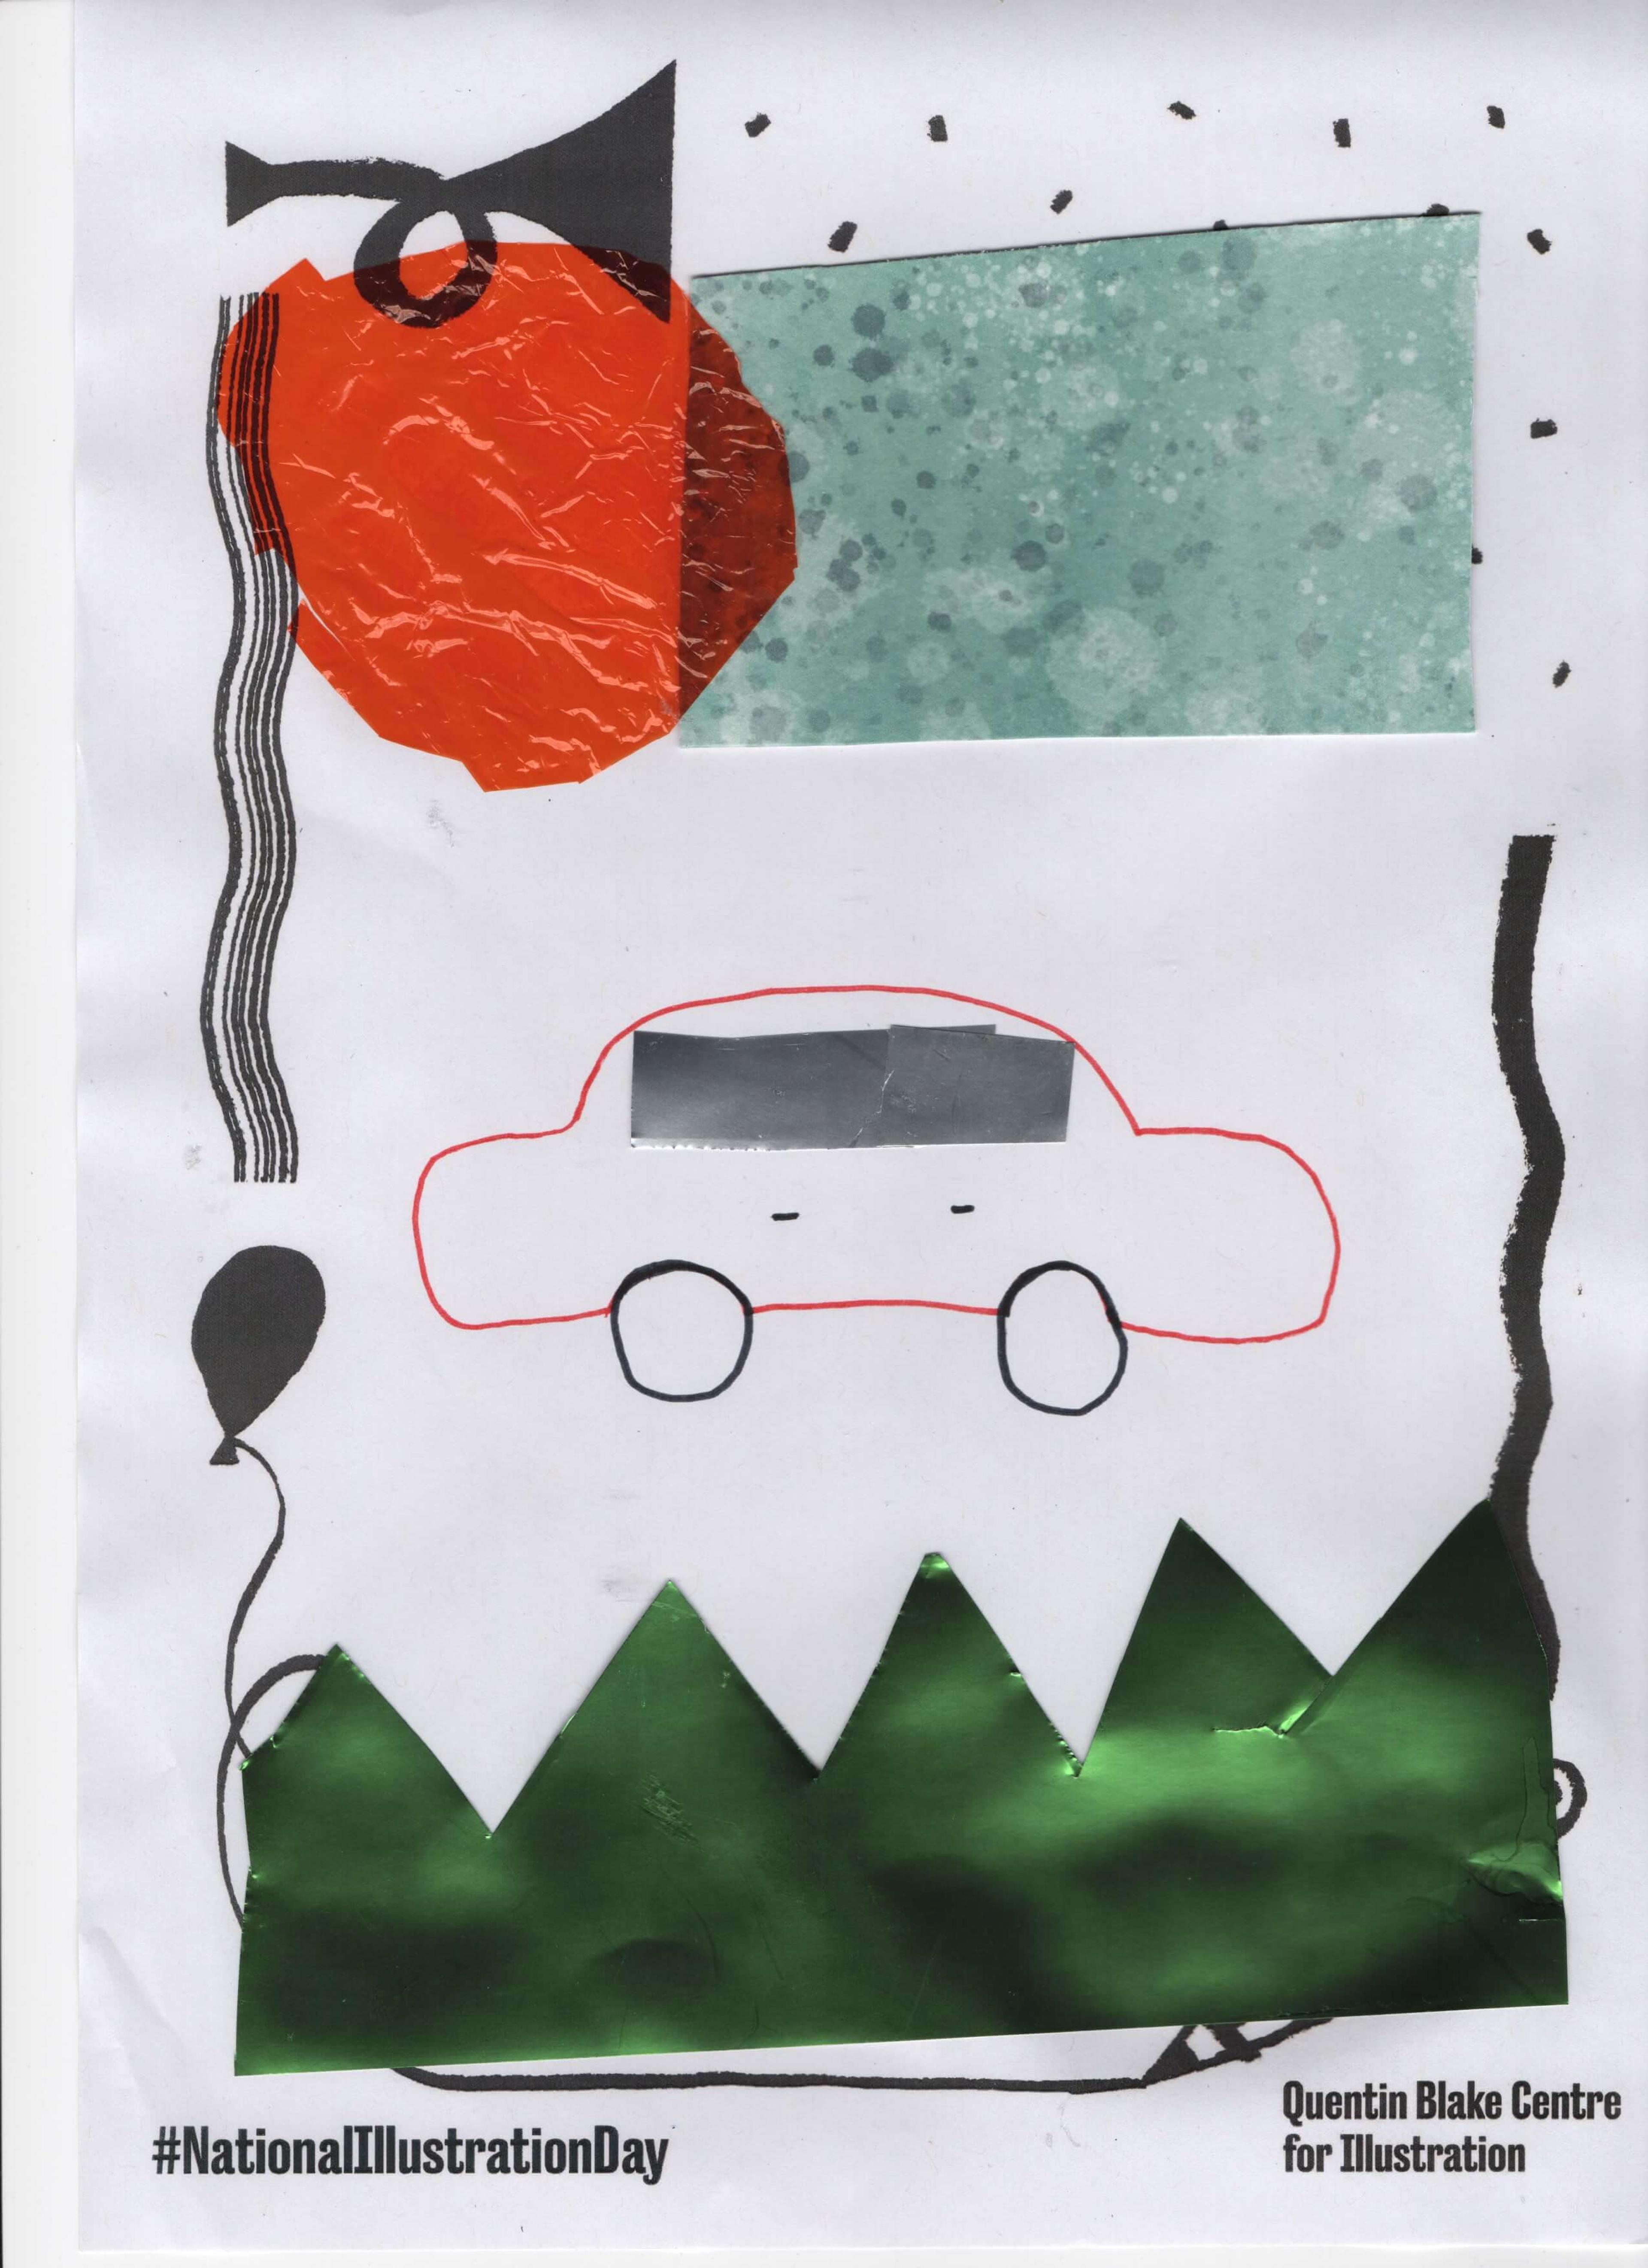 Marker drawing of a car set amidst collaged surroundings.